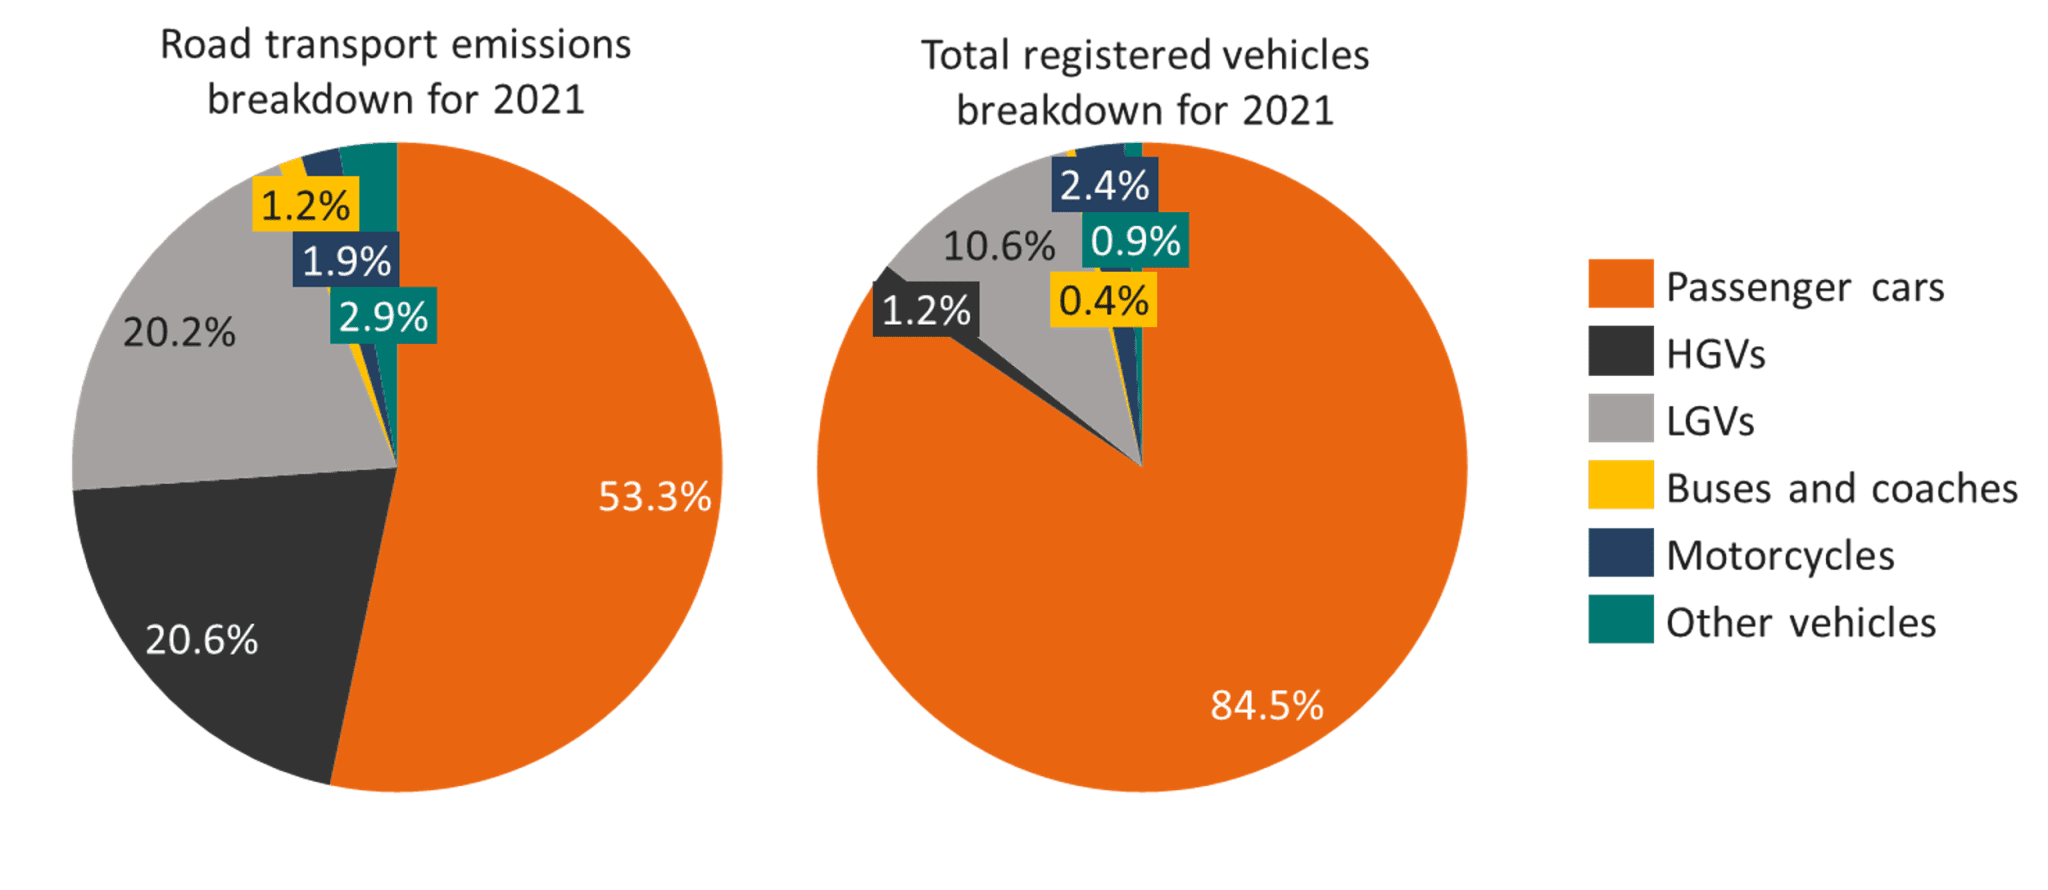 Two pie charts together horizontally. The pie chart on the left shows the percentage breakdown of road transport emissions in Scotland in 2021, split between passenger cars, HGVs, LGVs, buses and coaches, motorcycles and other vehicles. 
